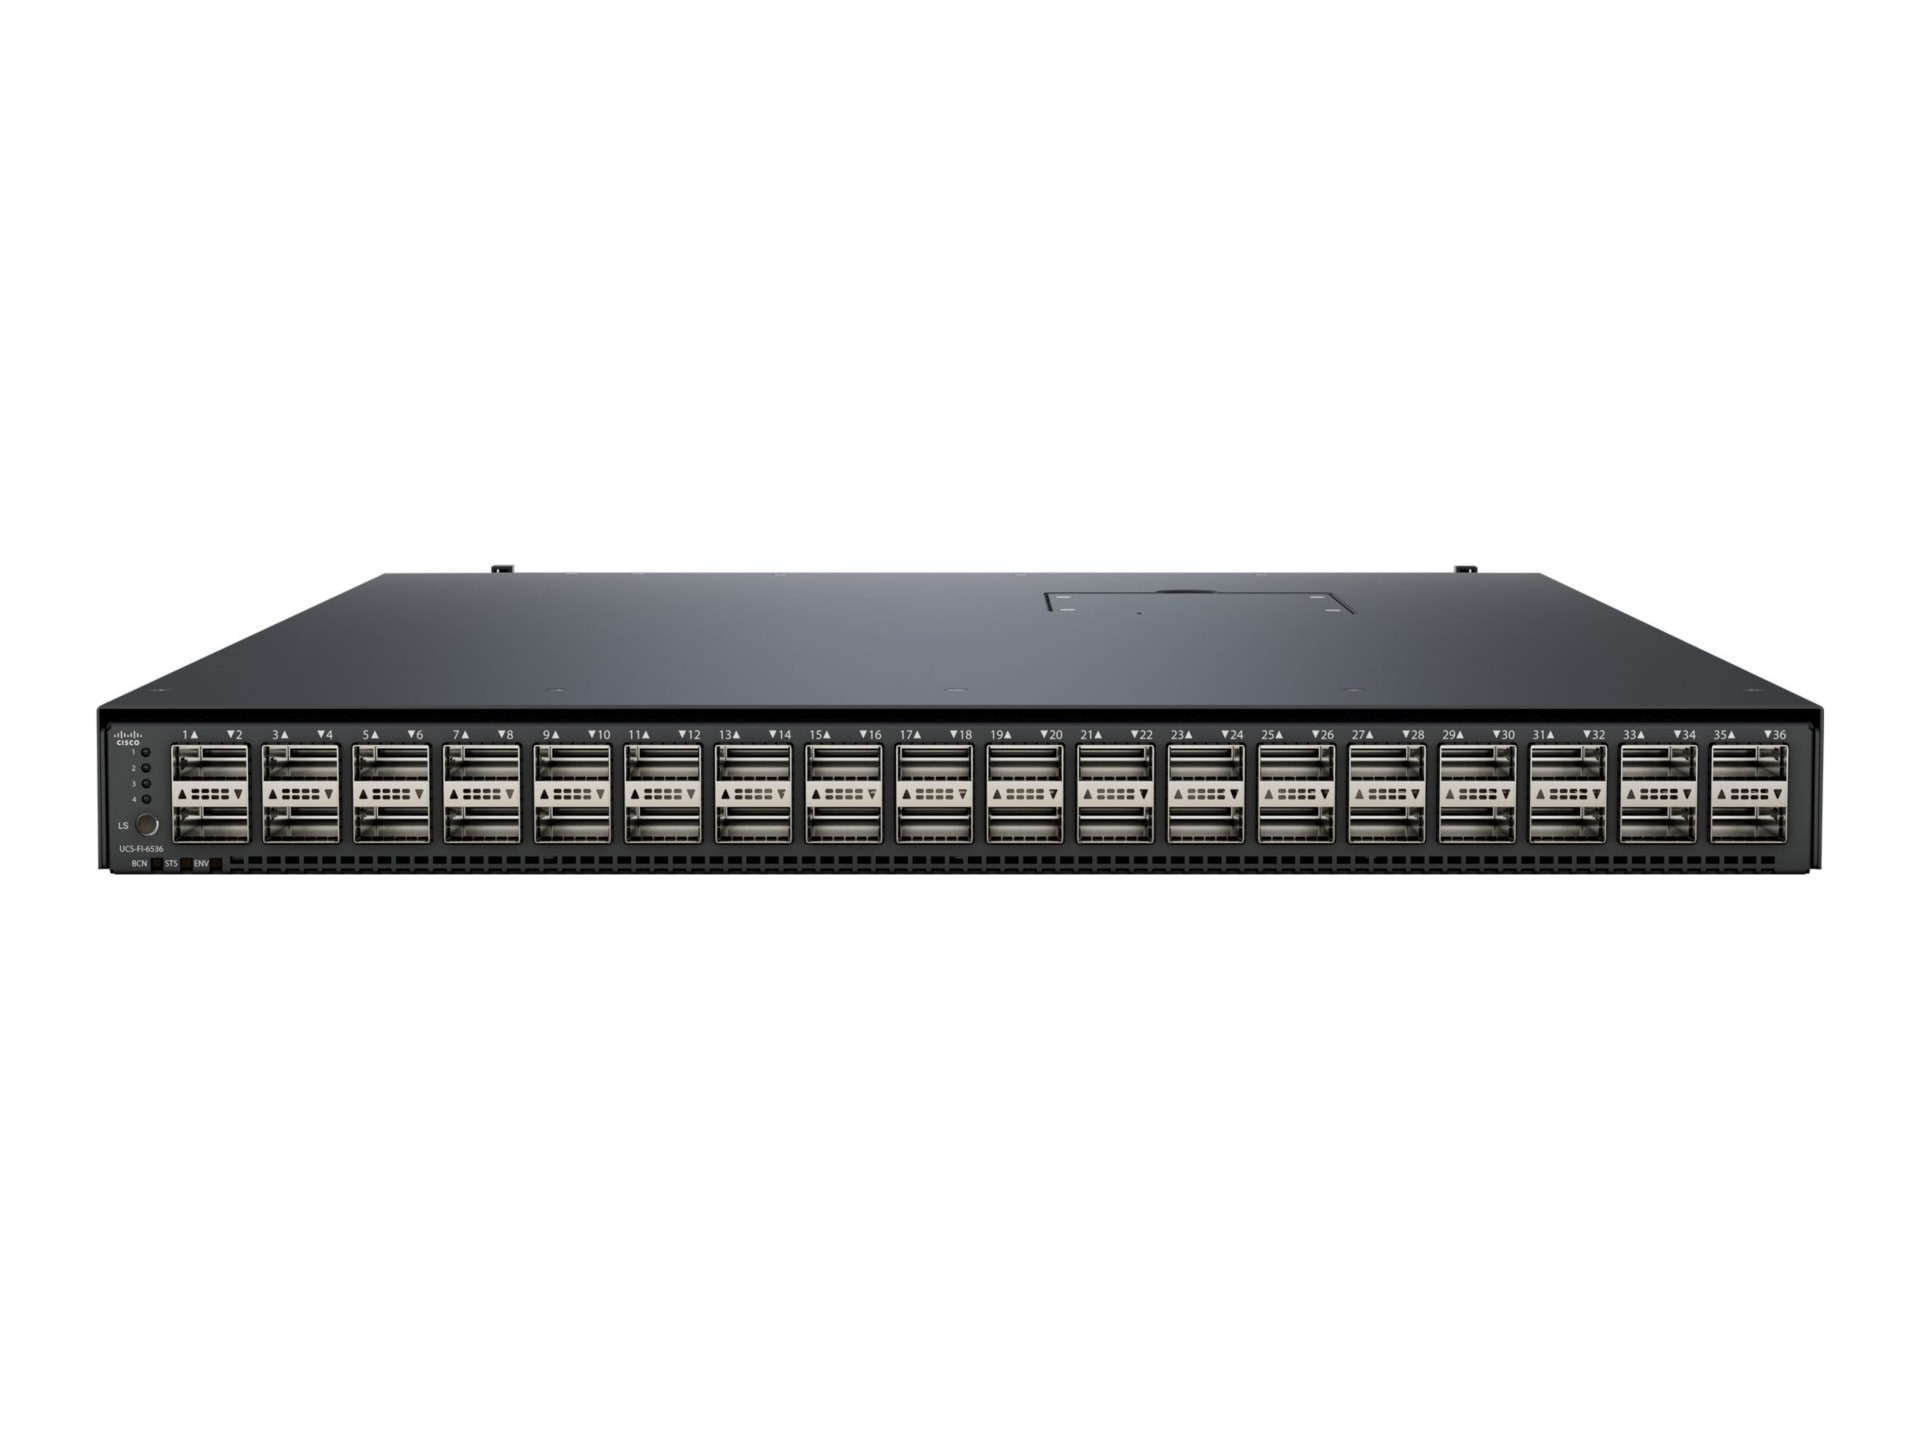 Cisco UCS 6536 Fabric Interconnect - switch - 36 ports - managed - rack-mountable